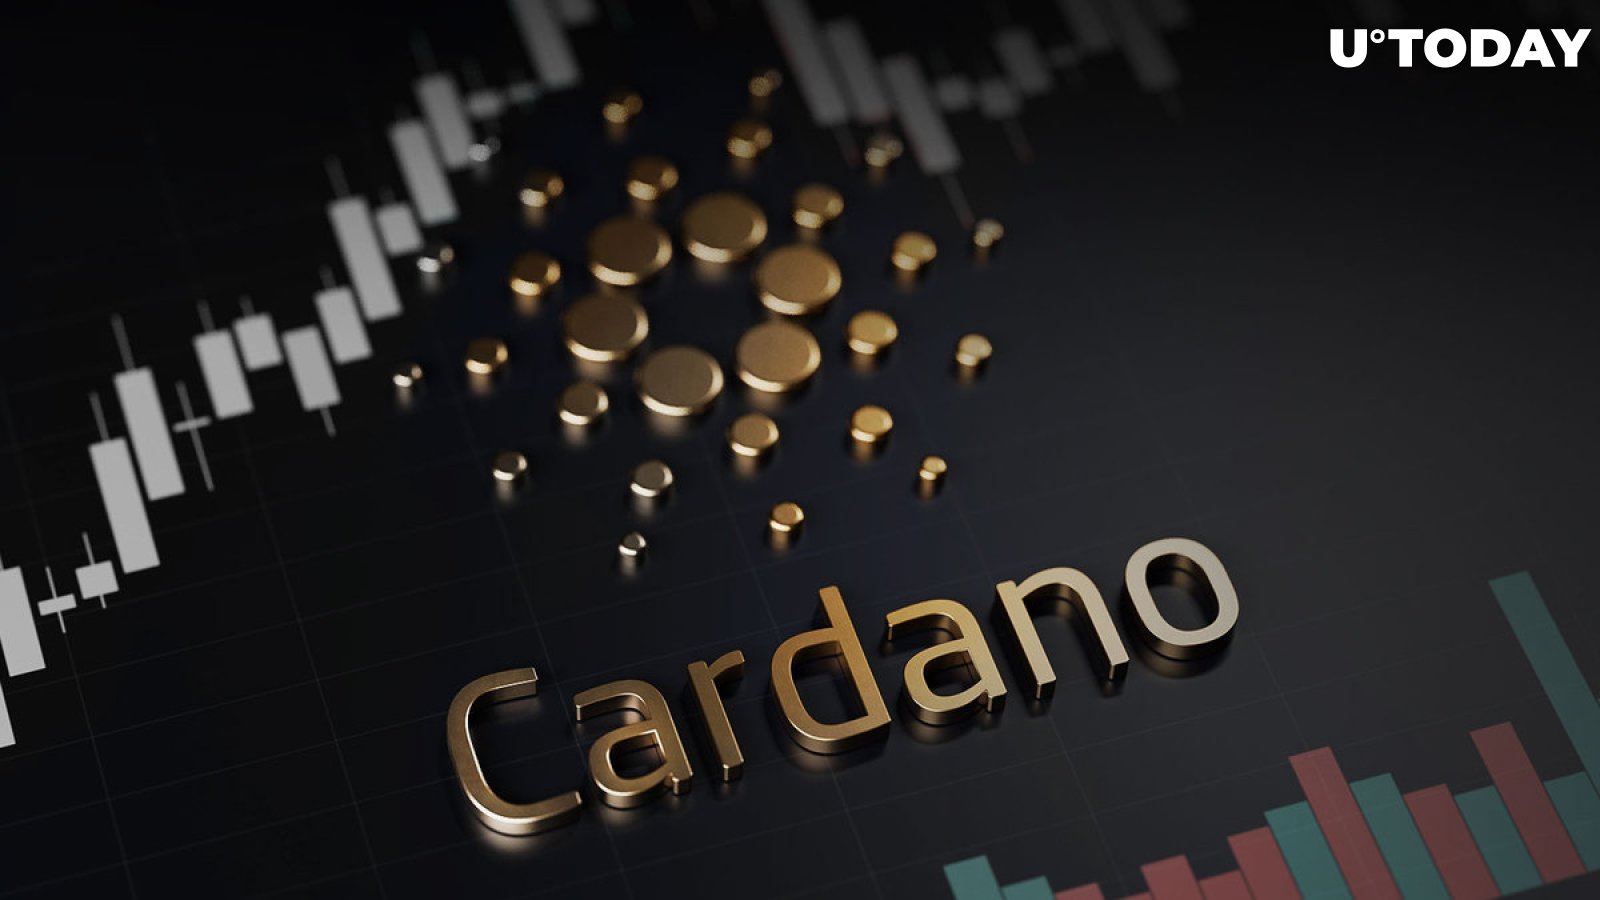 Cardano (ADA) Transactions Volume Reaches Lowest Level Since January, Bounce Ahead?